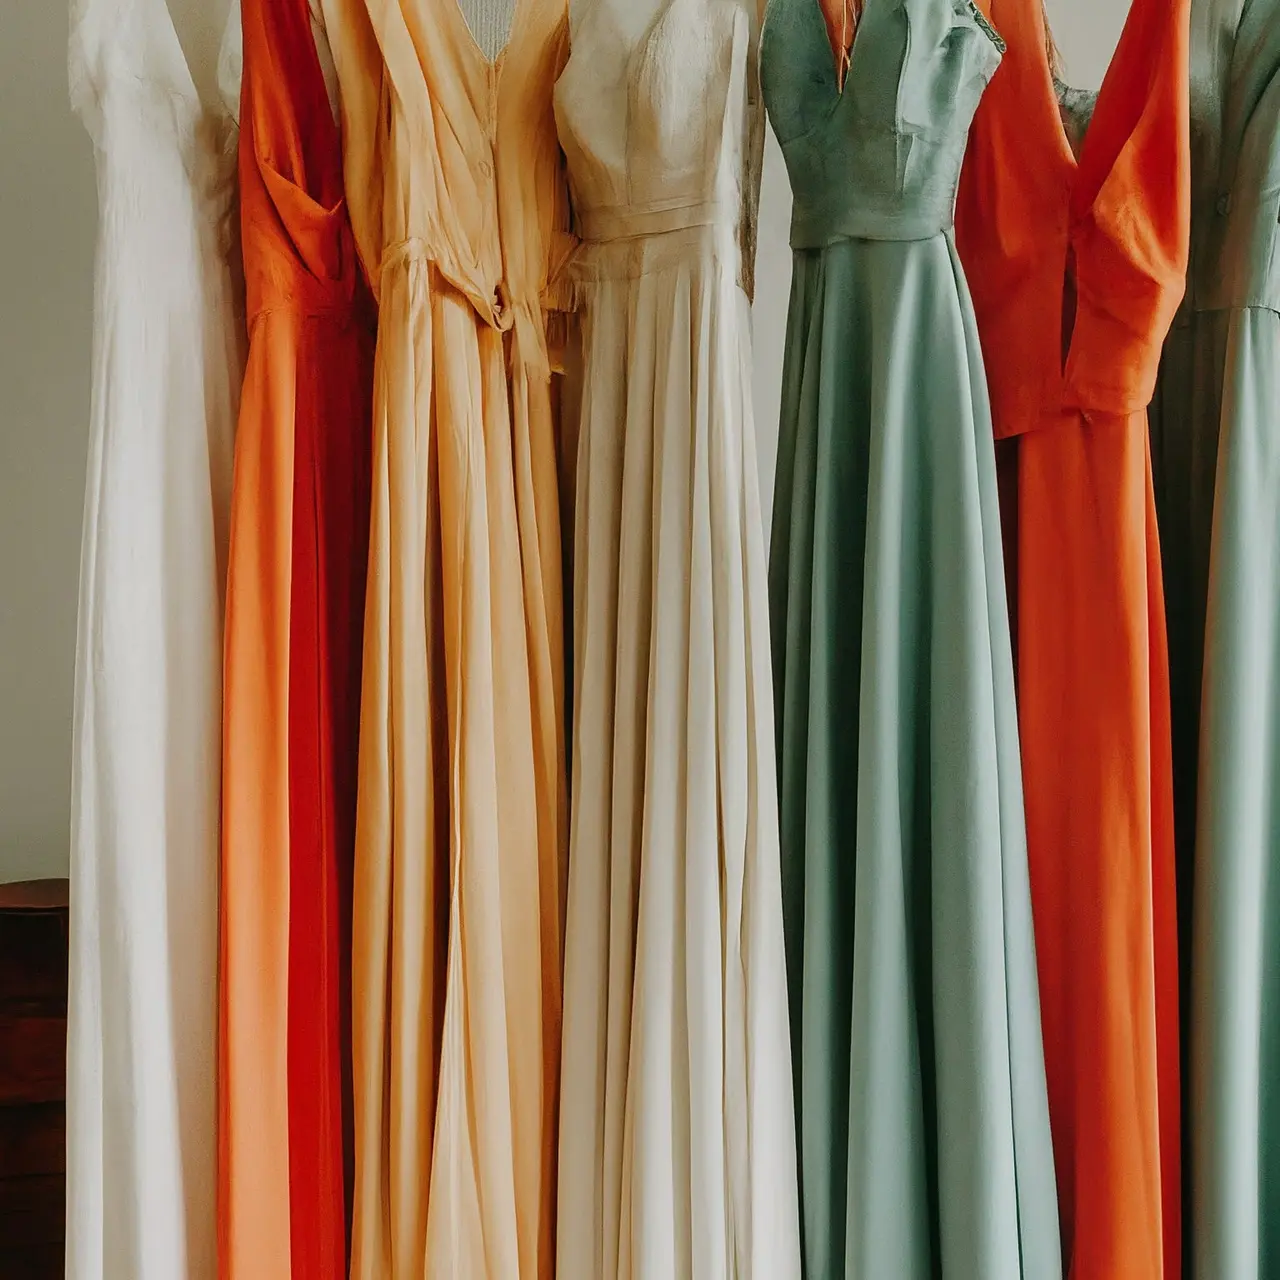 A variety of colorful bridesmaid dresses hanging in a row. 35mm stock photo